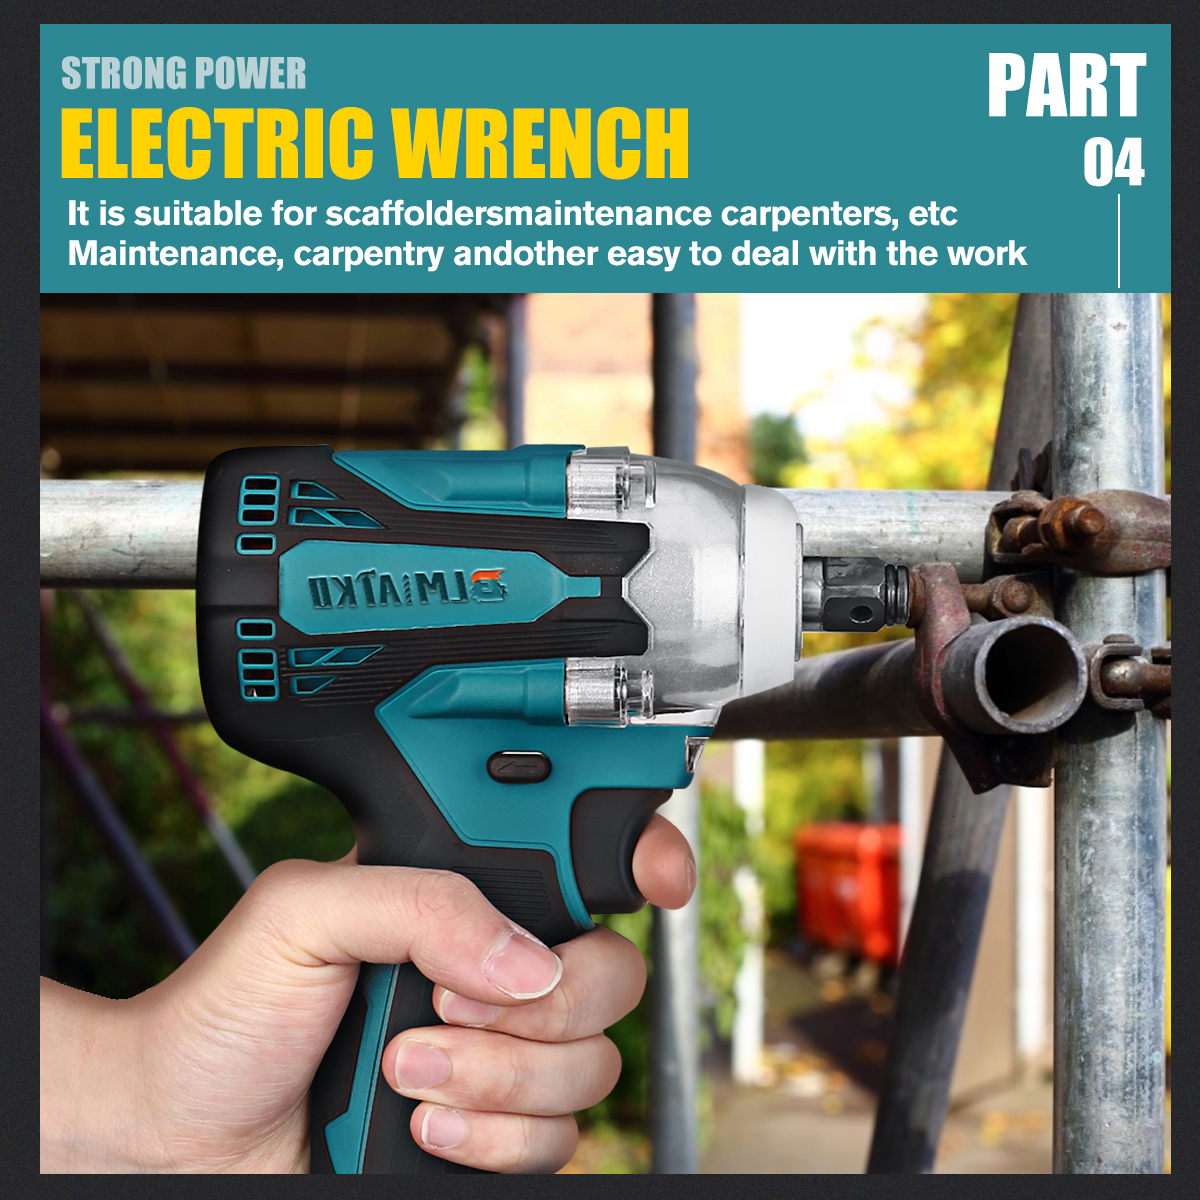 480Nm-Brushless-Impact-Wrench-Cordless-High-Torque-12-Socket-Electric-Wrench-Screwdriver-Power-Tool--1841579-10